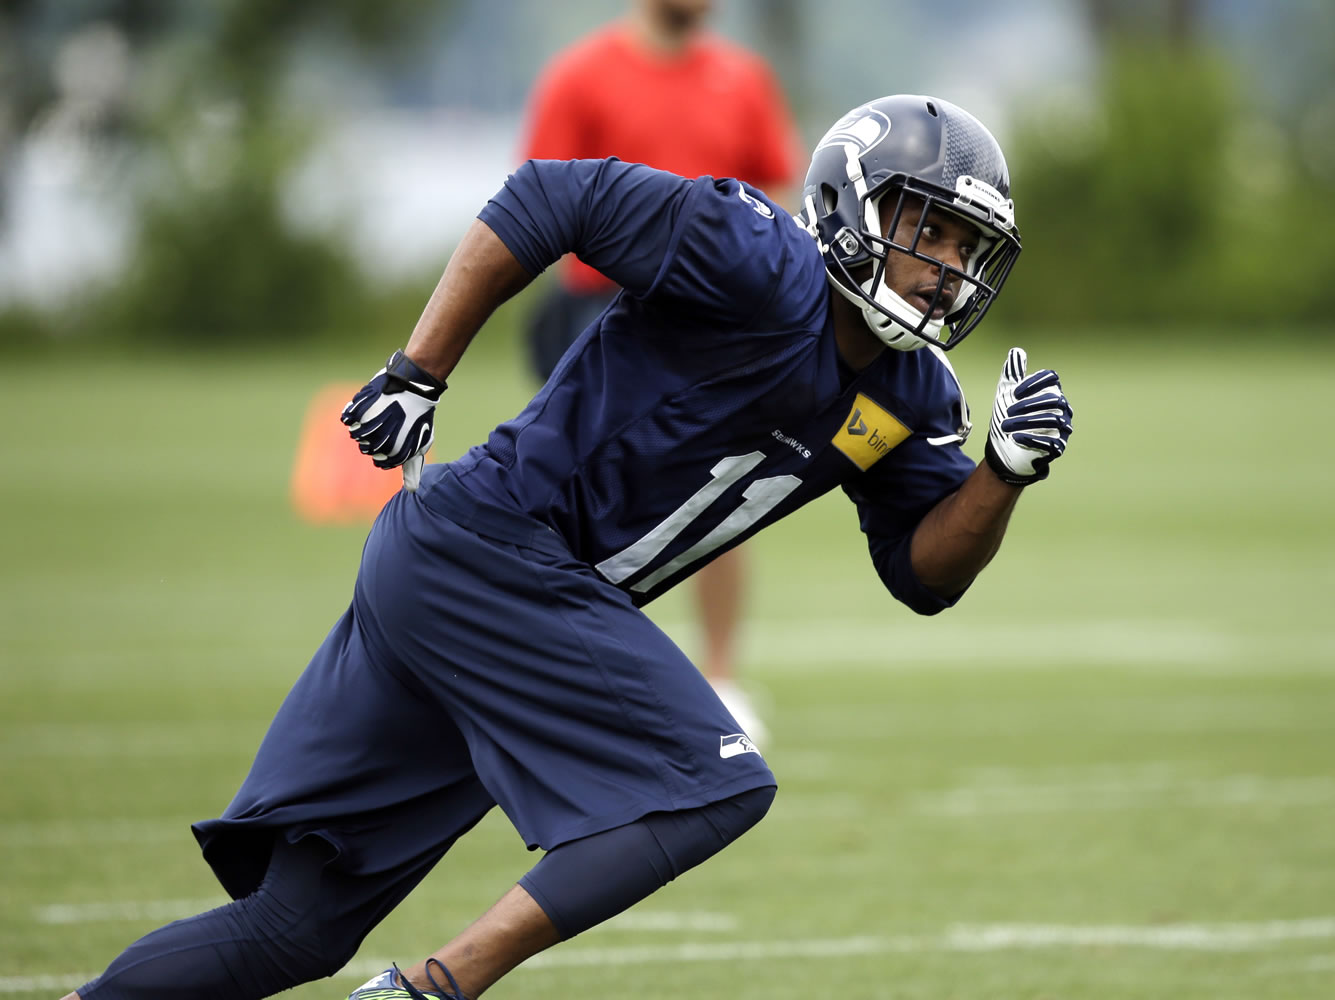 Seattle Seahawks' Percy Harvin runs during an NFL organized team activity football practice Thursday, June 12, 2014, in Renton, Wash.